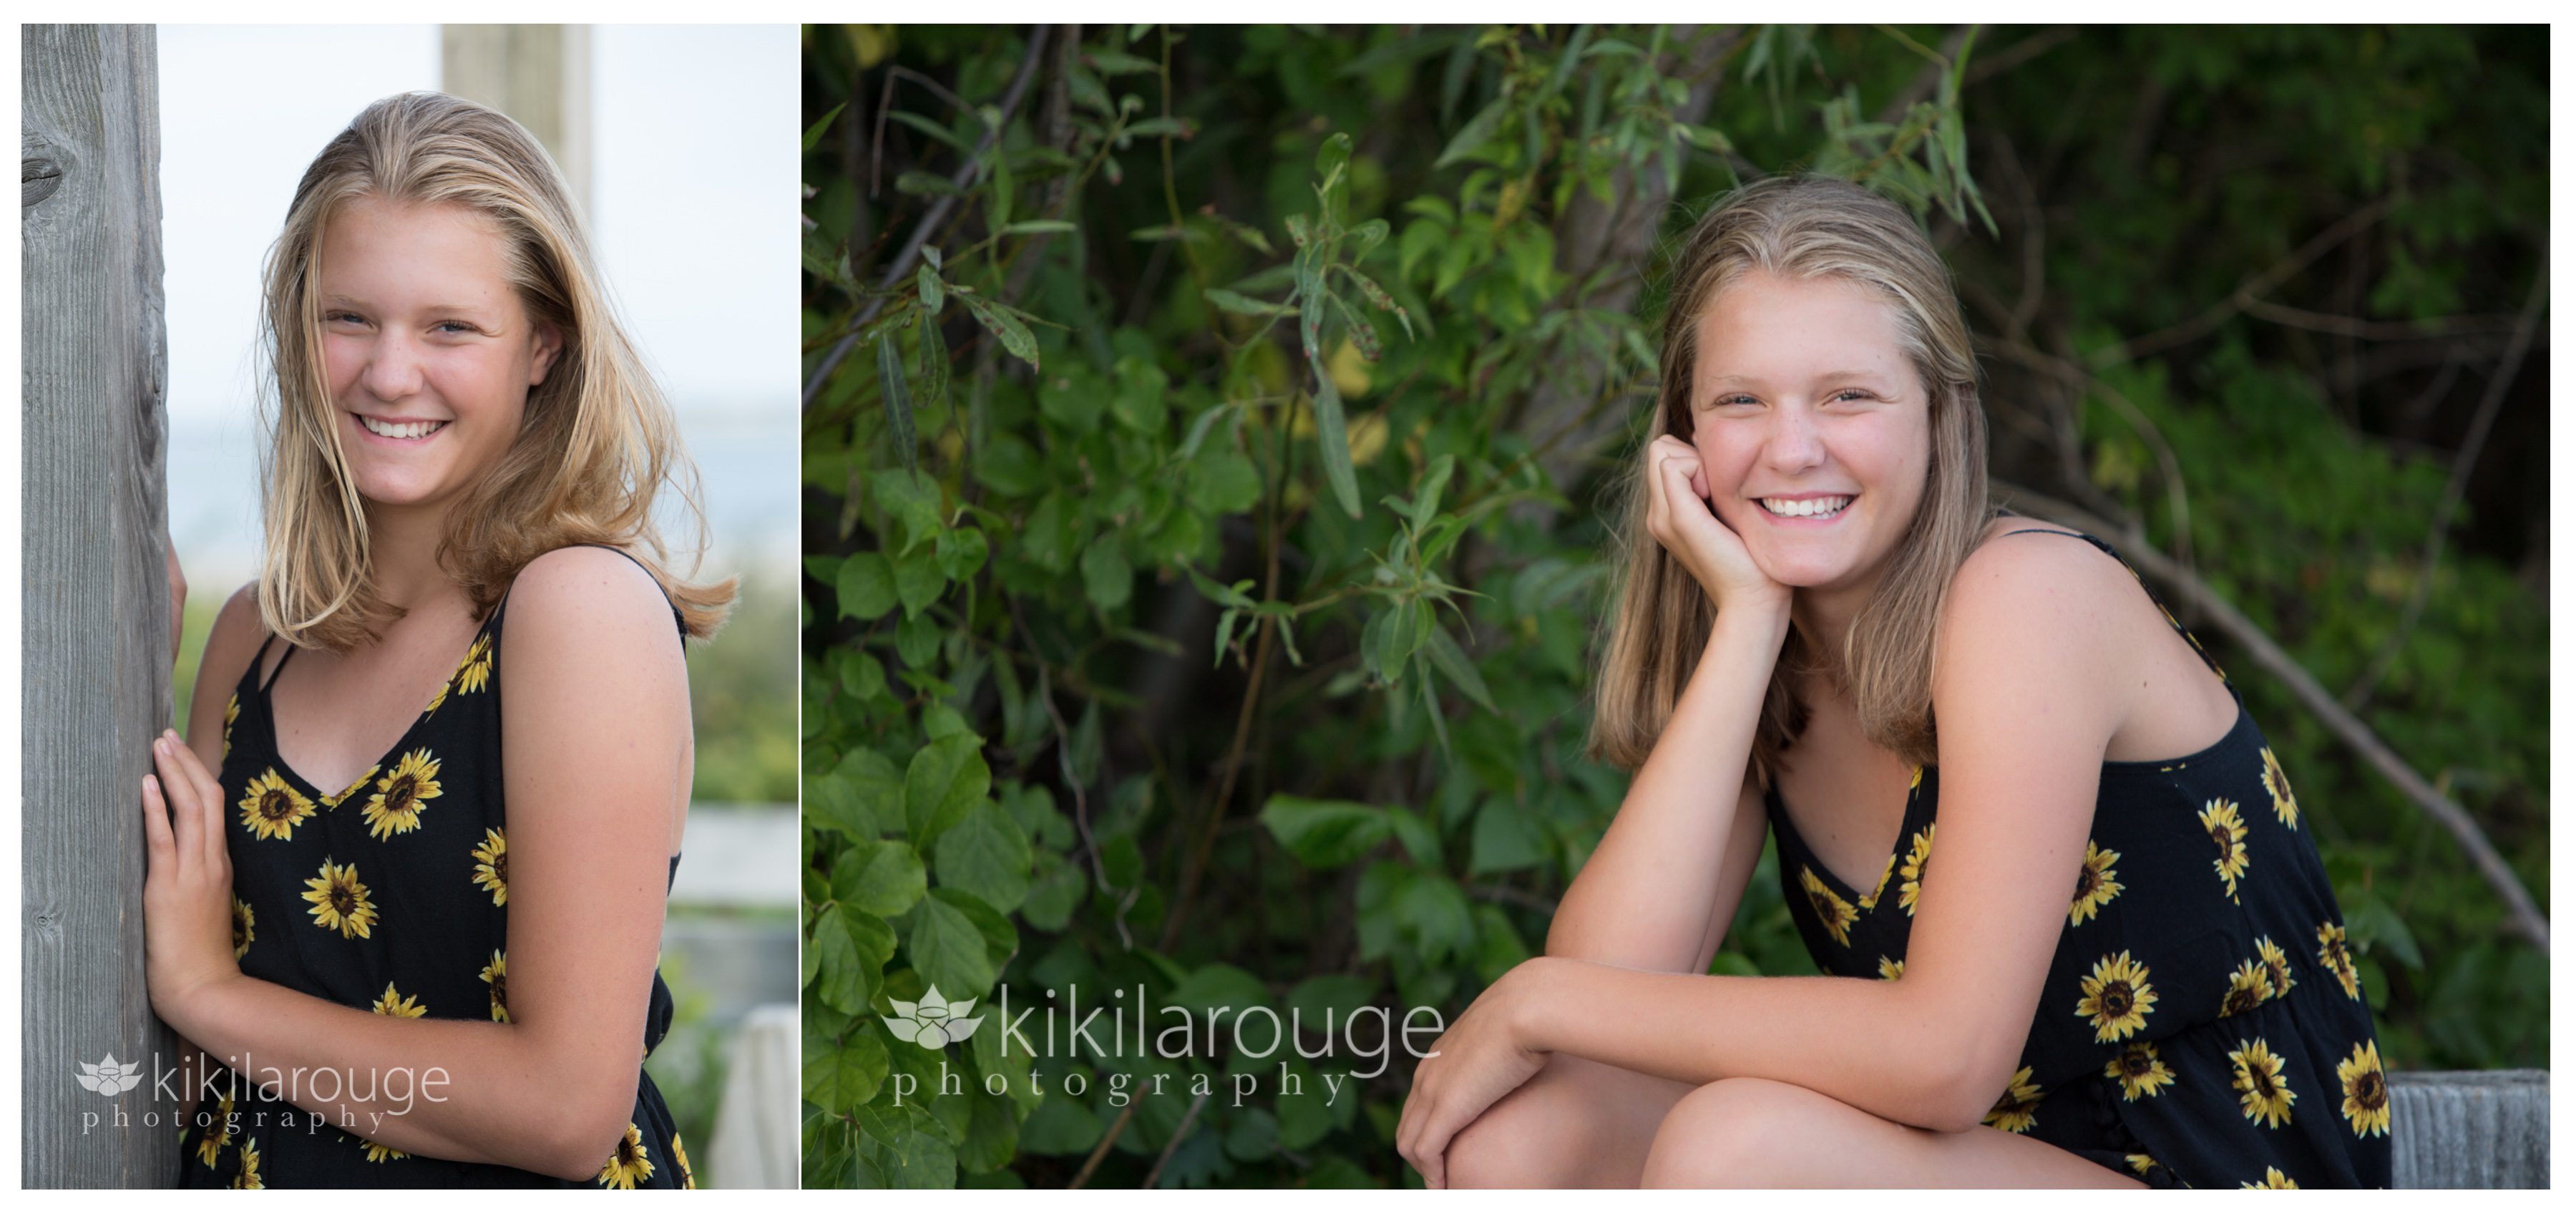 Portraits of young girl in sunflower romper